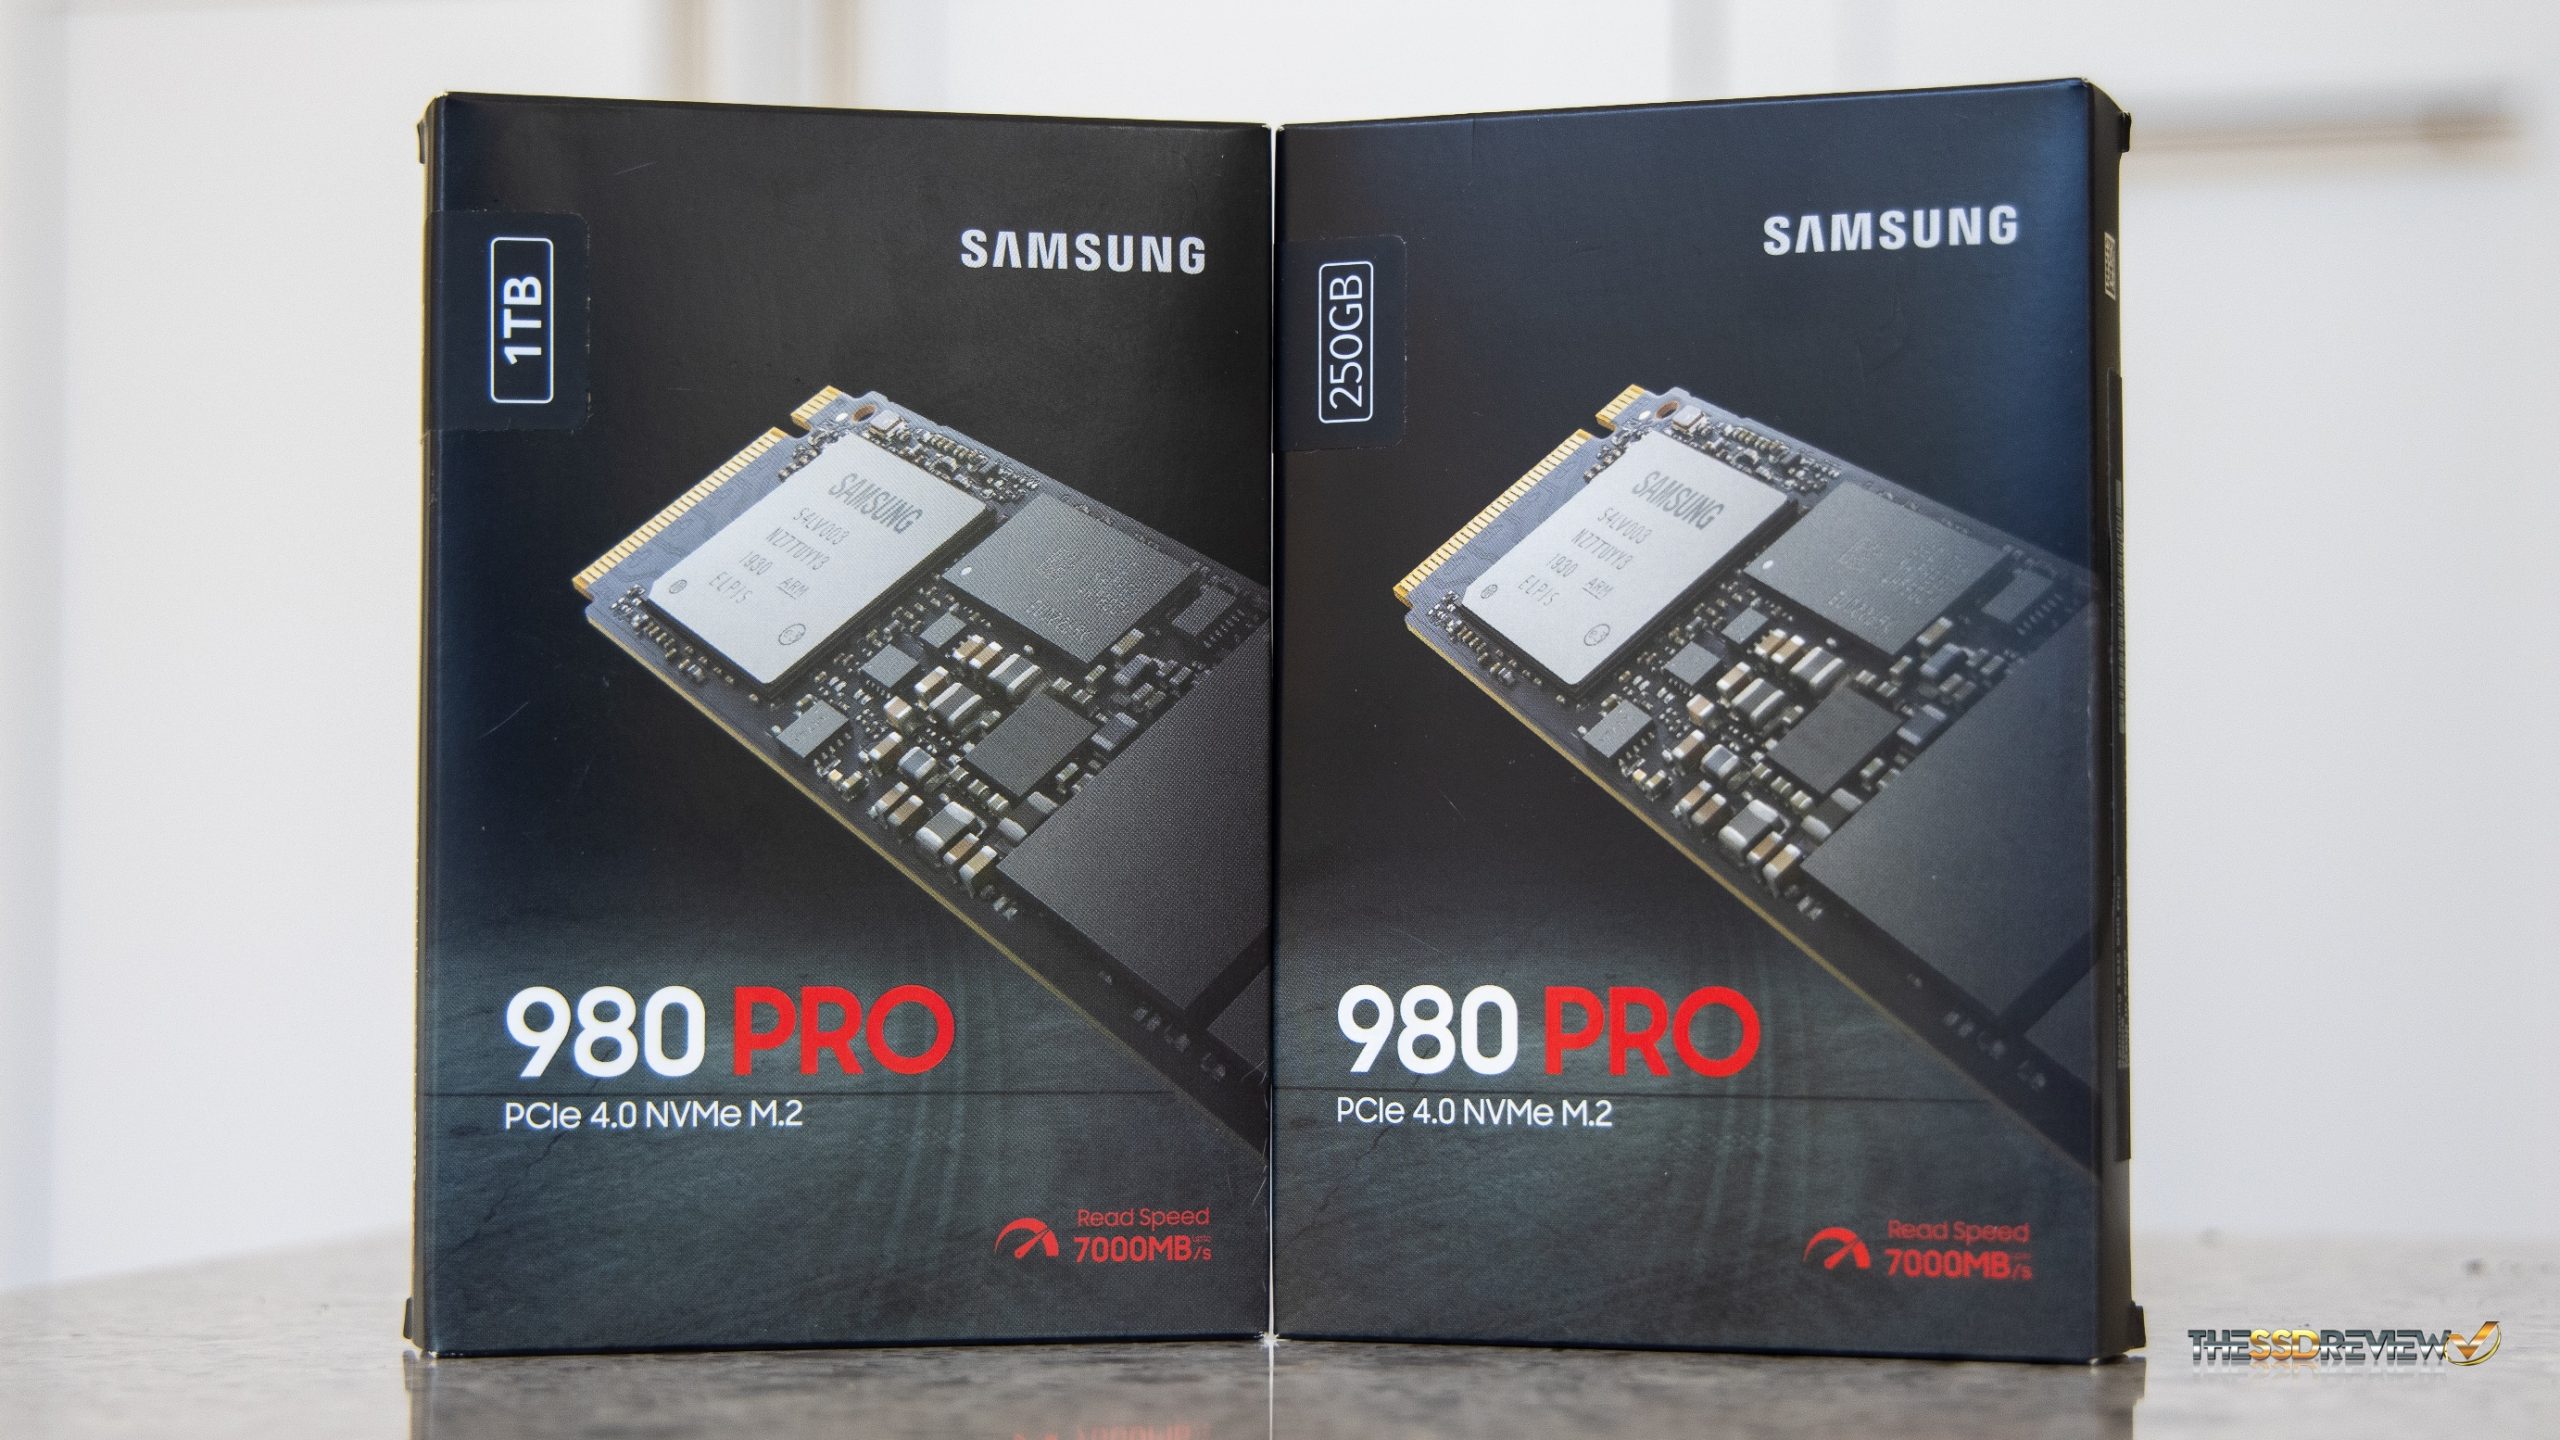 Samsung SSD 980 Pro With Heatsink PCIe 4.0 NVMe 1TB Review 